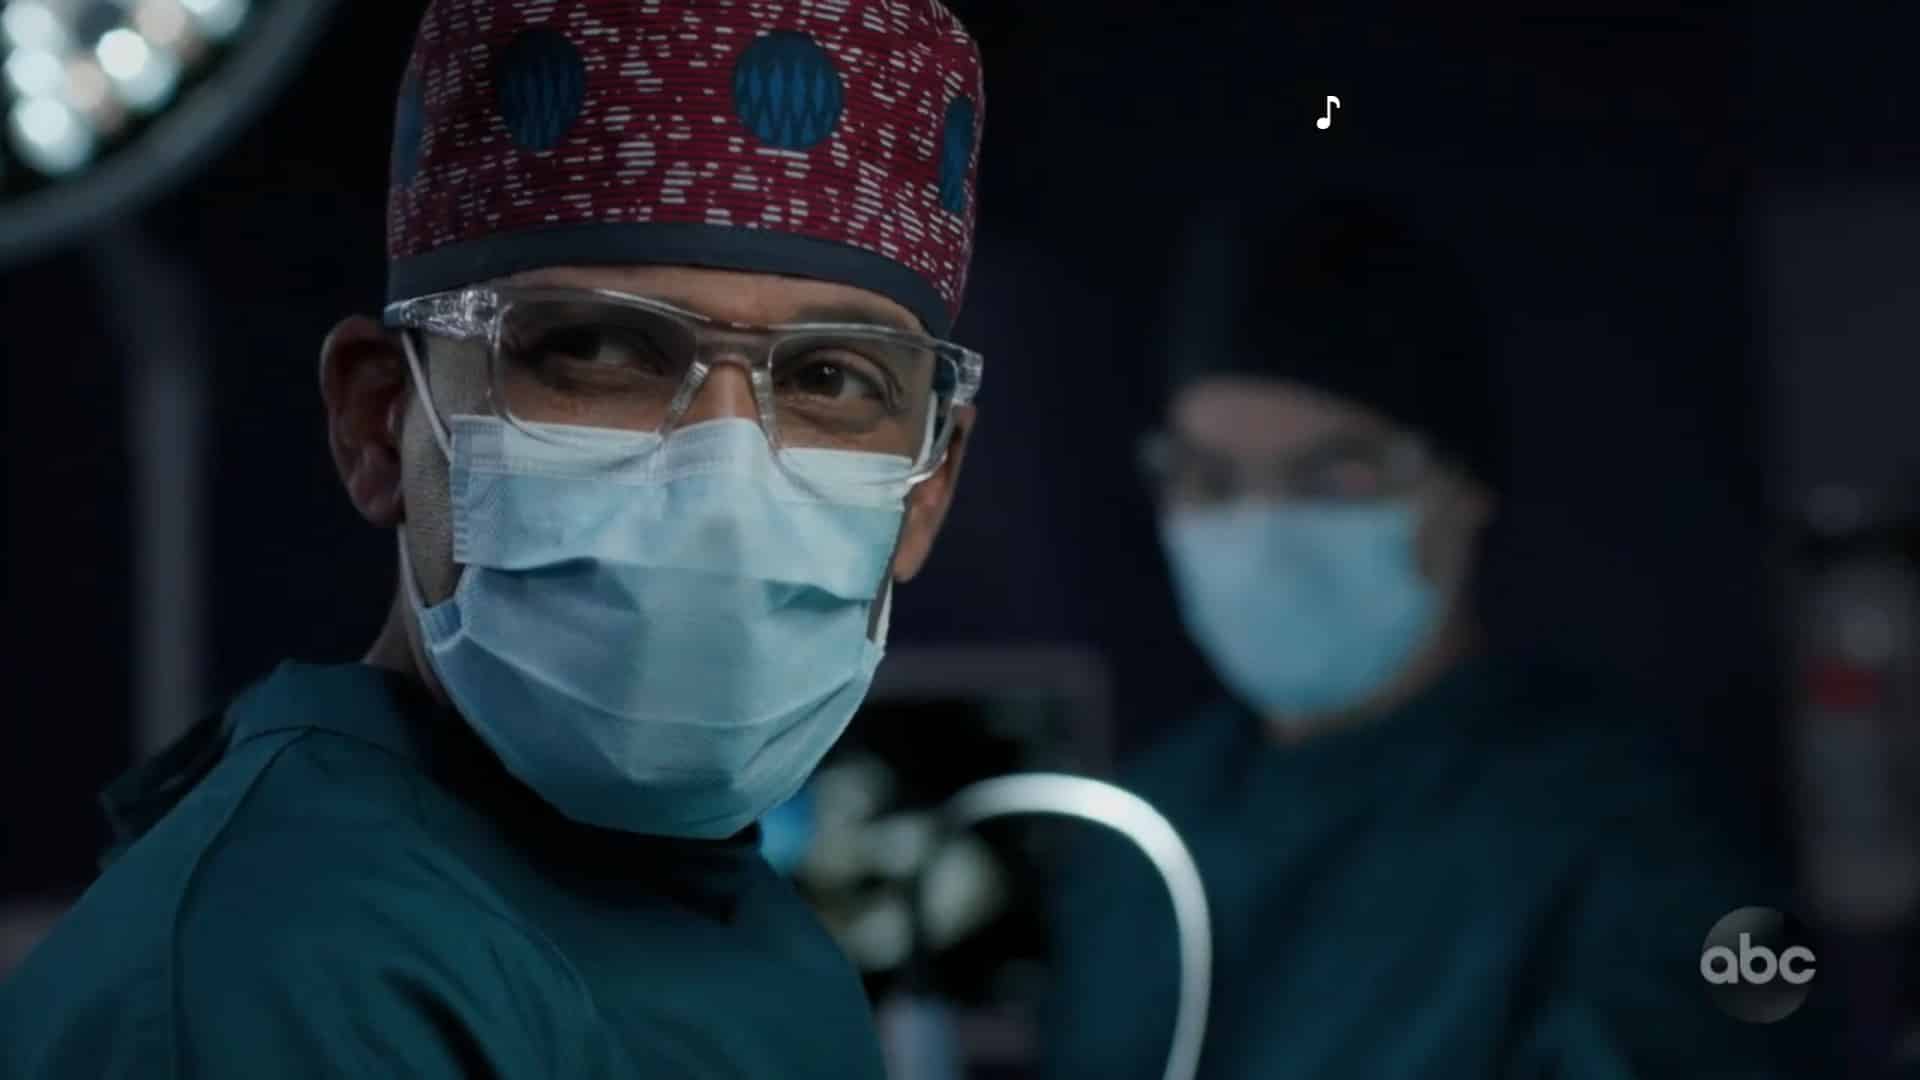 The Good Doctor: Season 4/ Episode 9 “Irresponsible Salad Bar Practices” – Recap/ Review (with Spoilers)